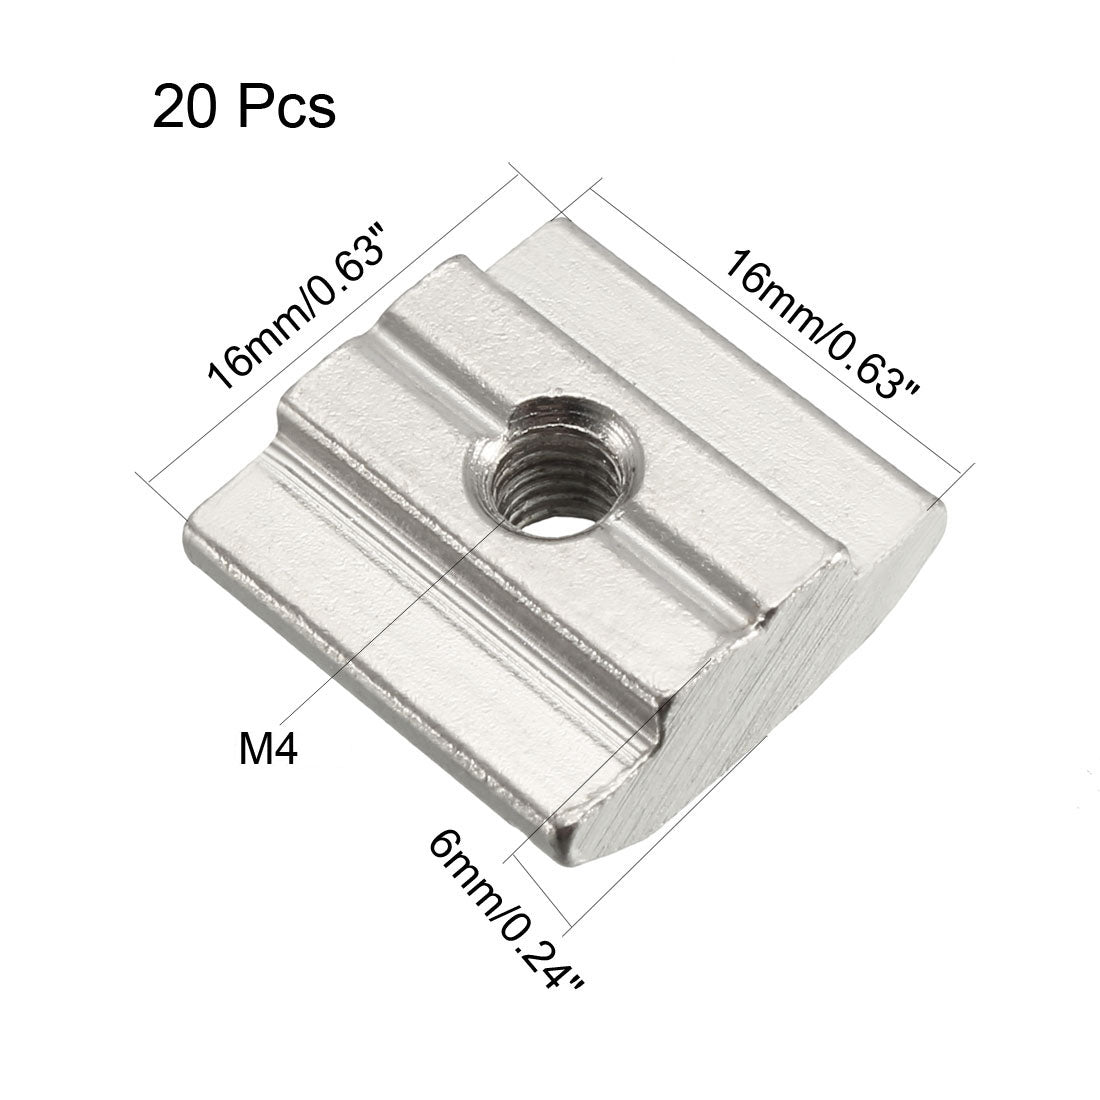 Uxcell Uxcell Slide in T-Nut, M8 Threaded for 3030 Series Aluminum Extrusions Profile 8pcs